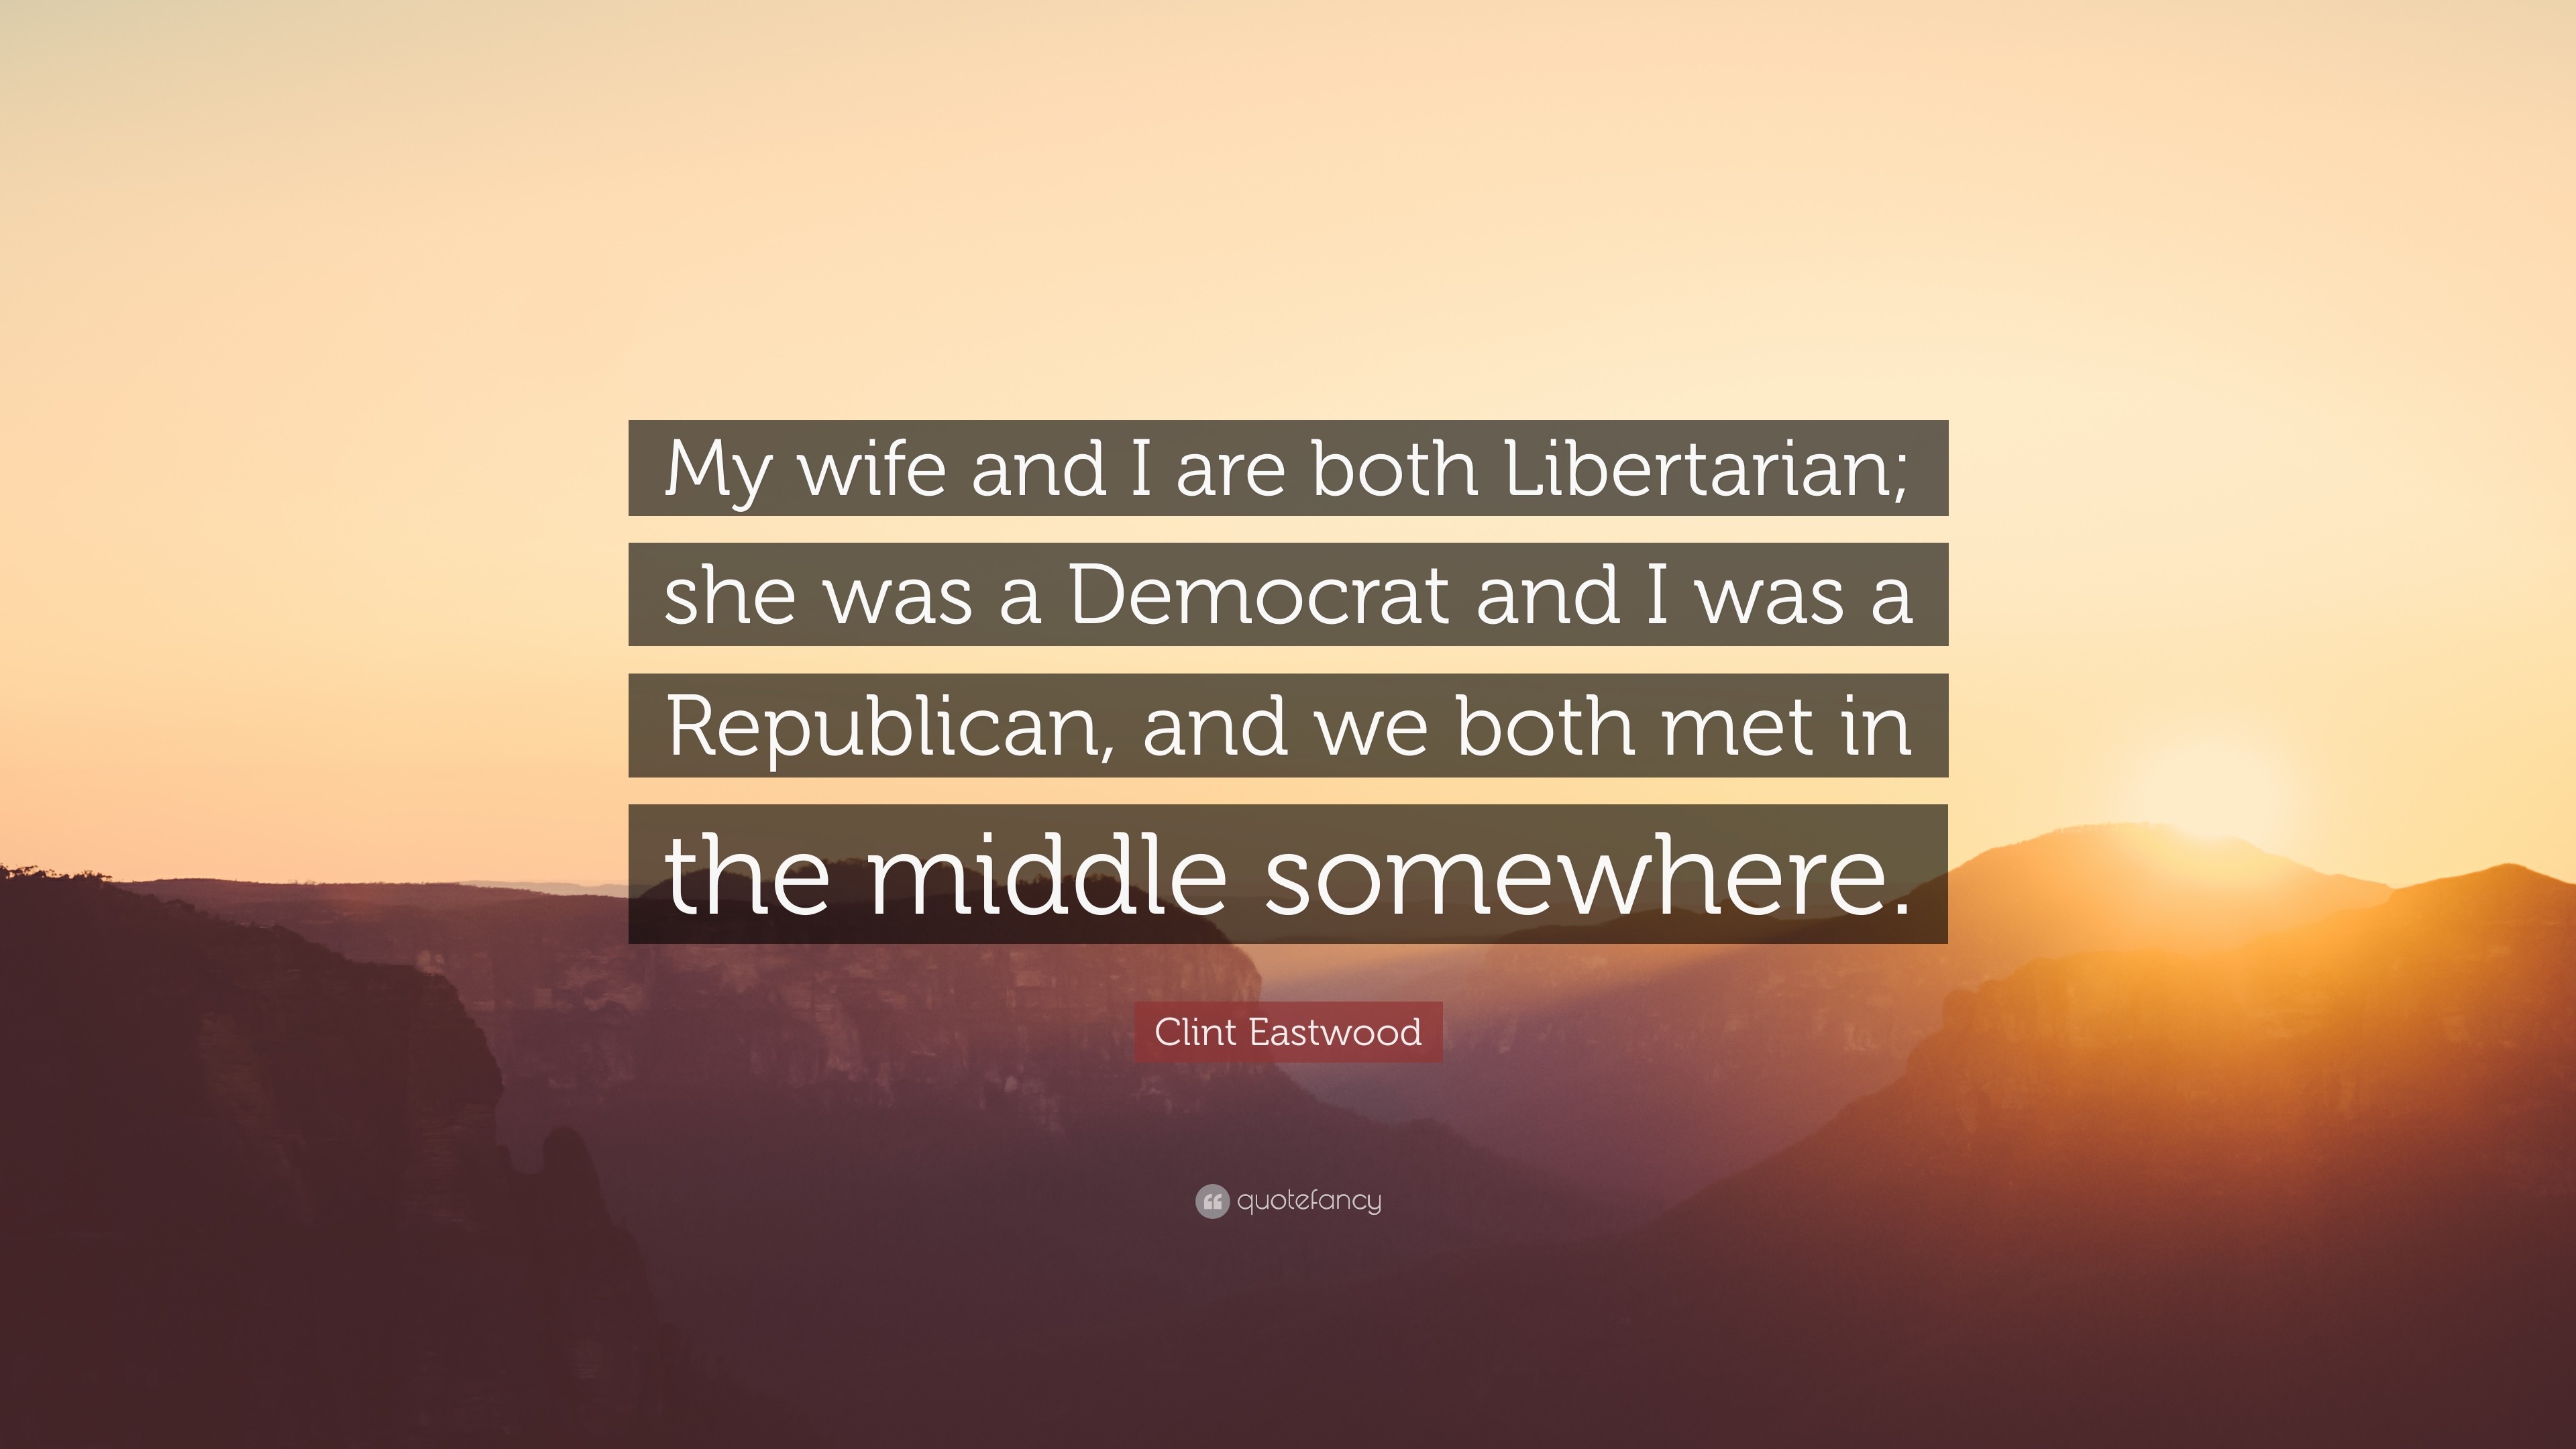 3840x2160 Clint Eastwood Quote: “My wife and I are both Libertarian; she was a